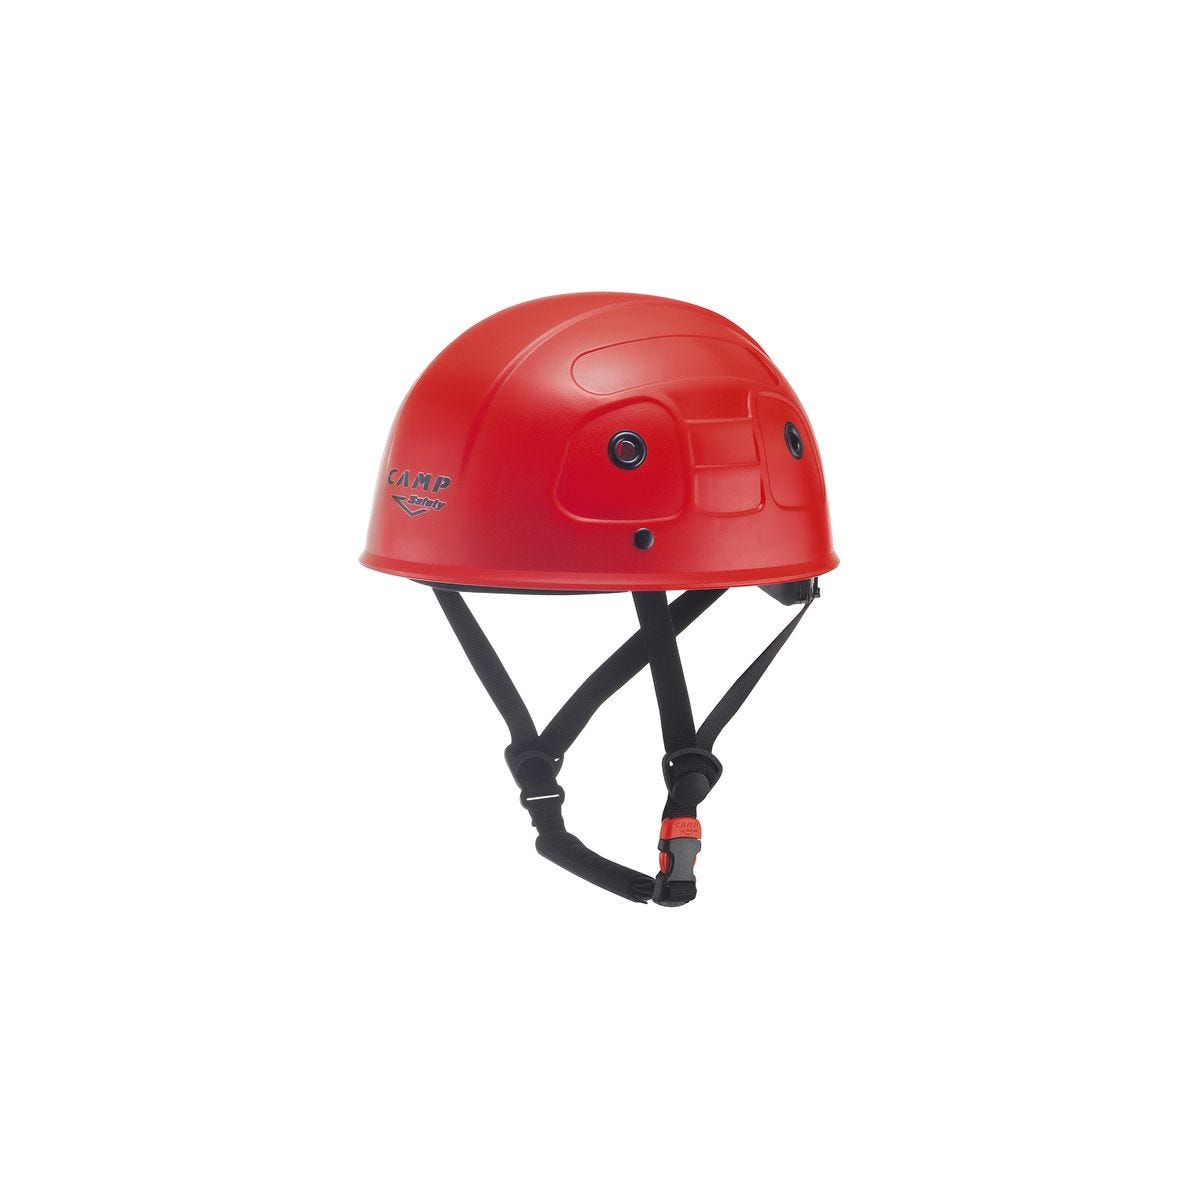 Casque de protection SAFETY STAR rouge - COVERGUARD 0